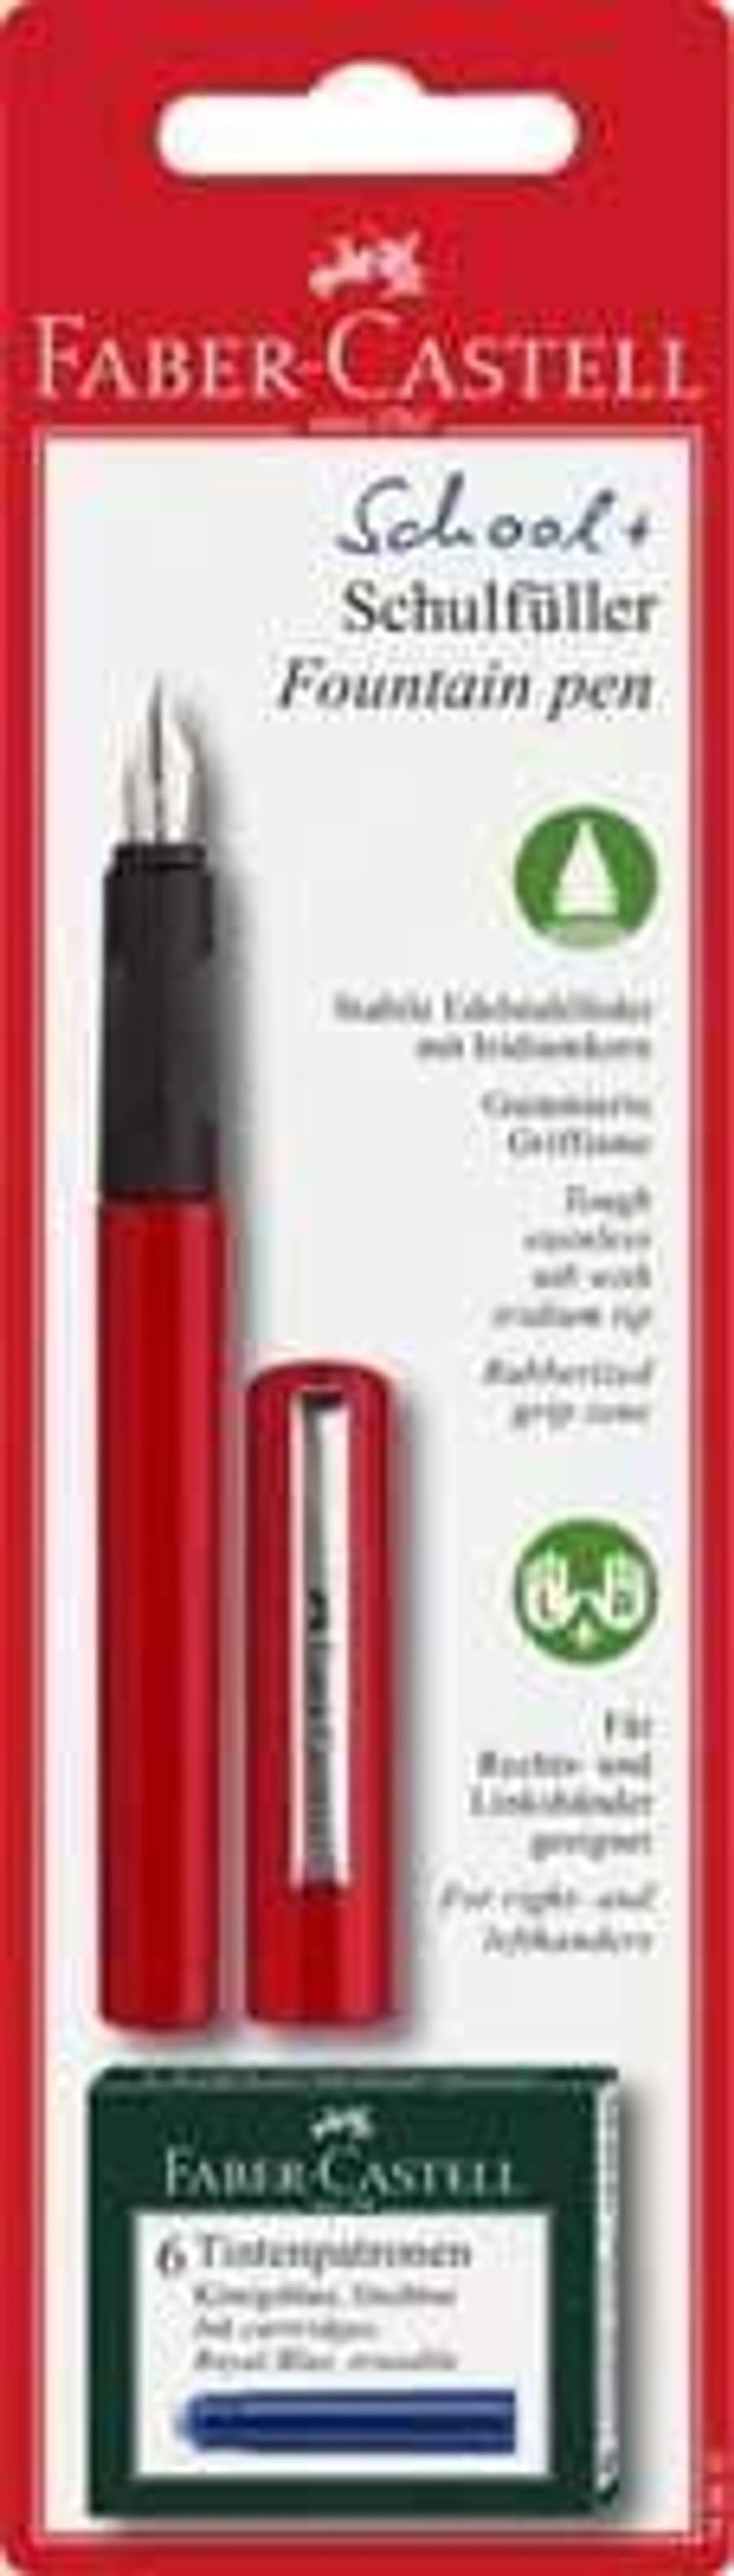 Faber And Castell Red Fountain Pen